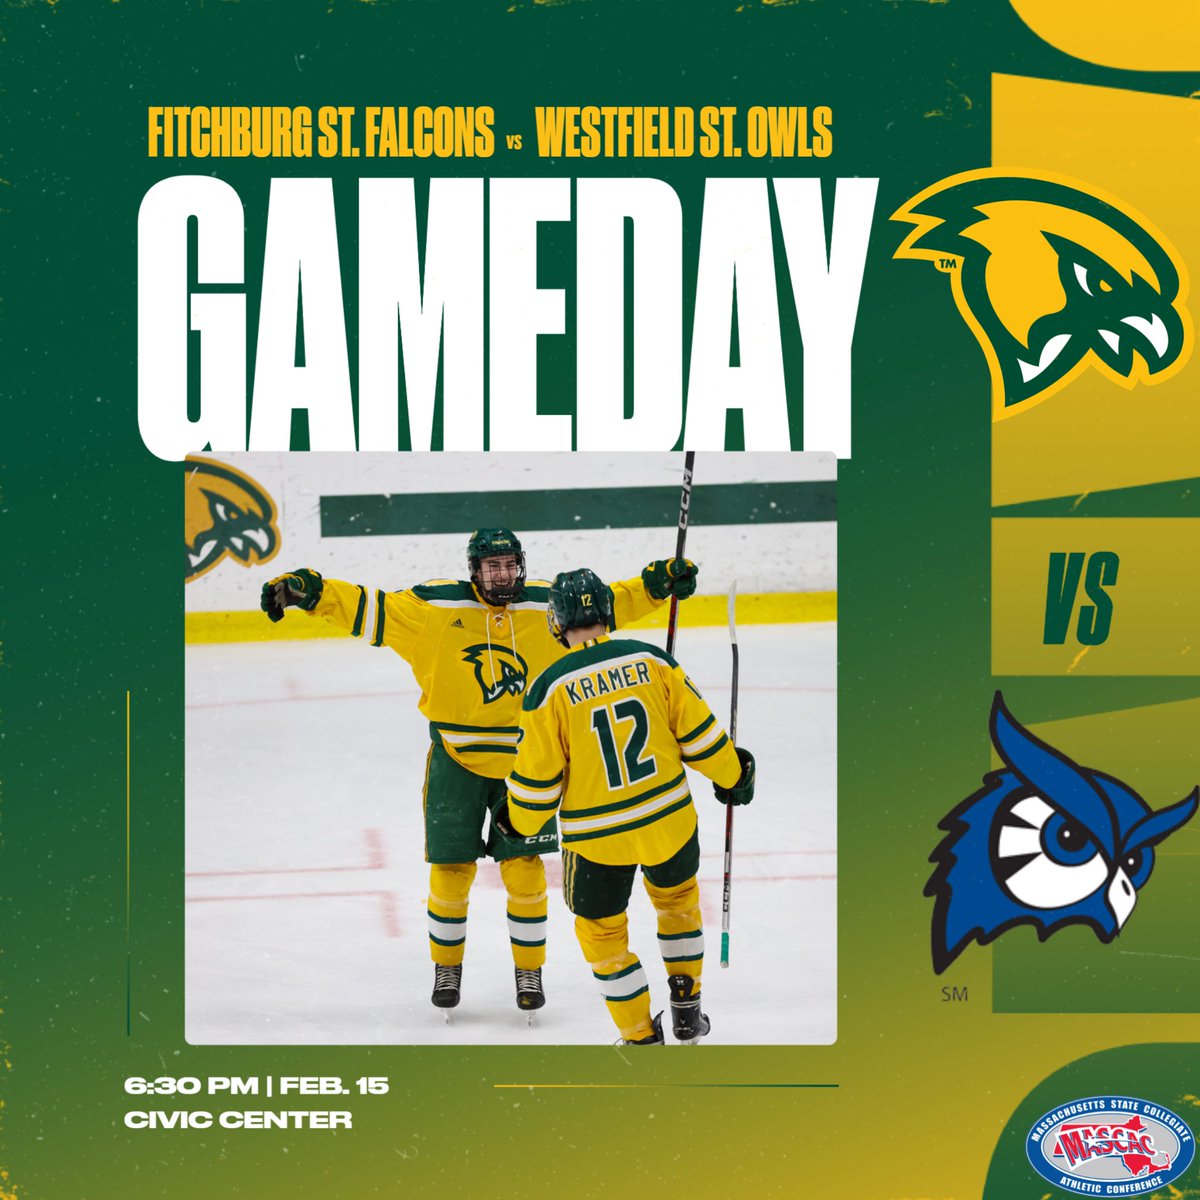 Your Falcons ice hockey team is back in the Wallace Civic Center tonight at 6:30 PM against Westfield State.